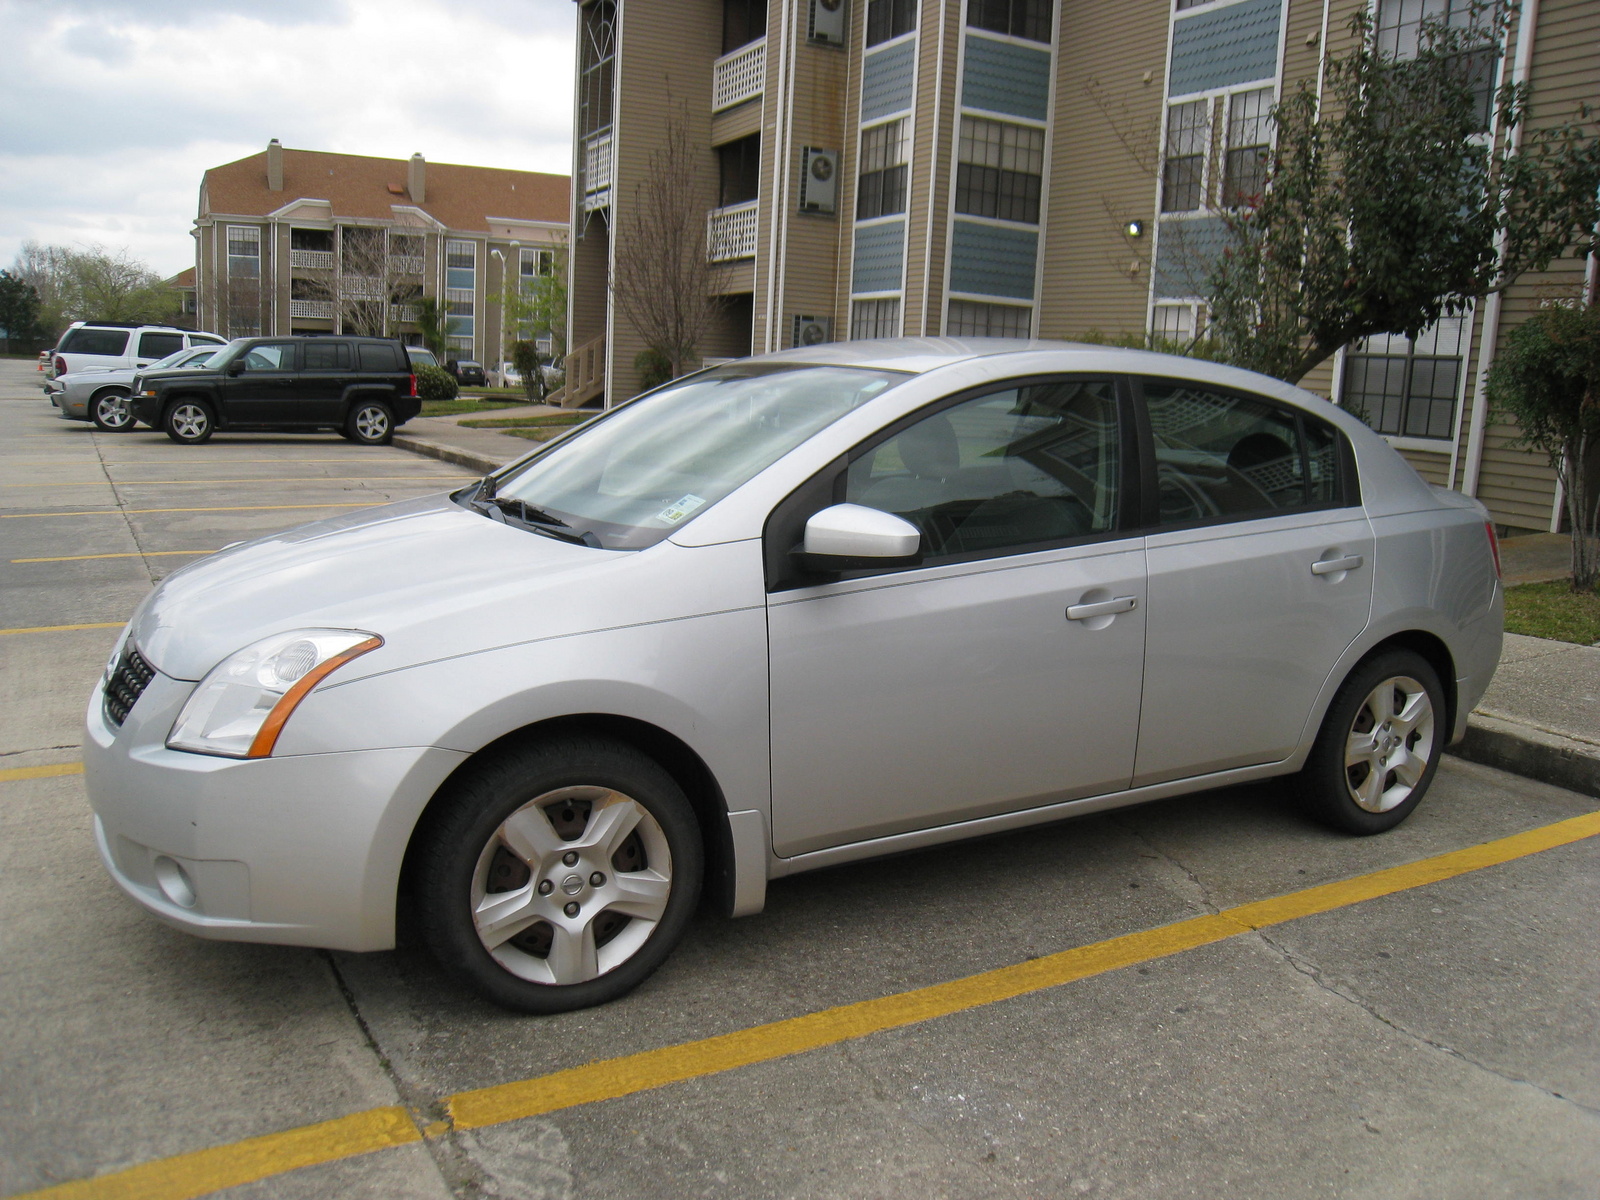 Ratings for 2008 nissan sentra #1